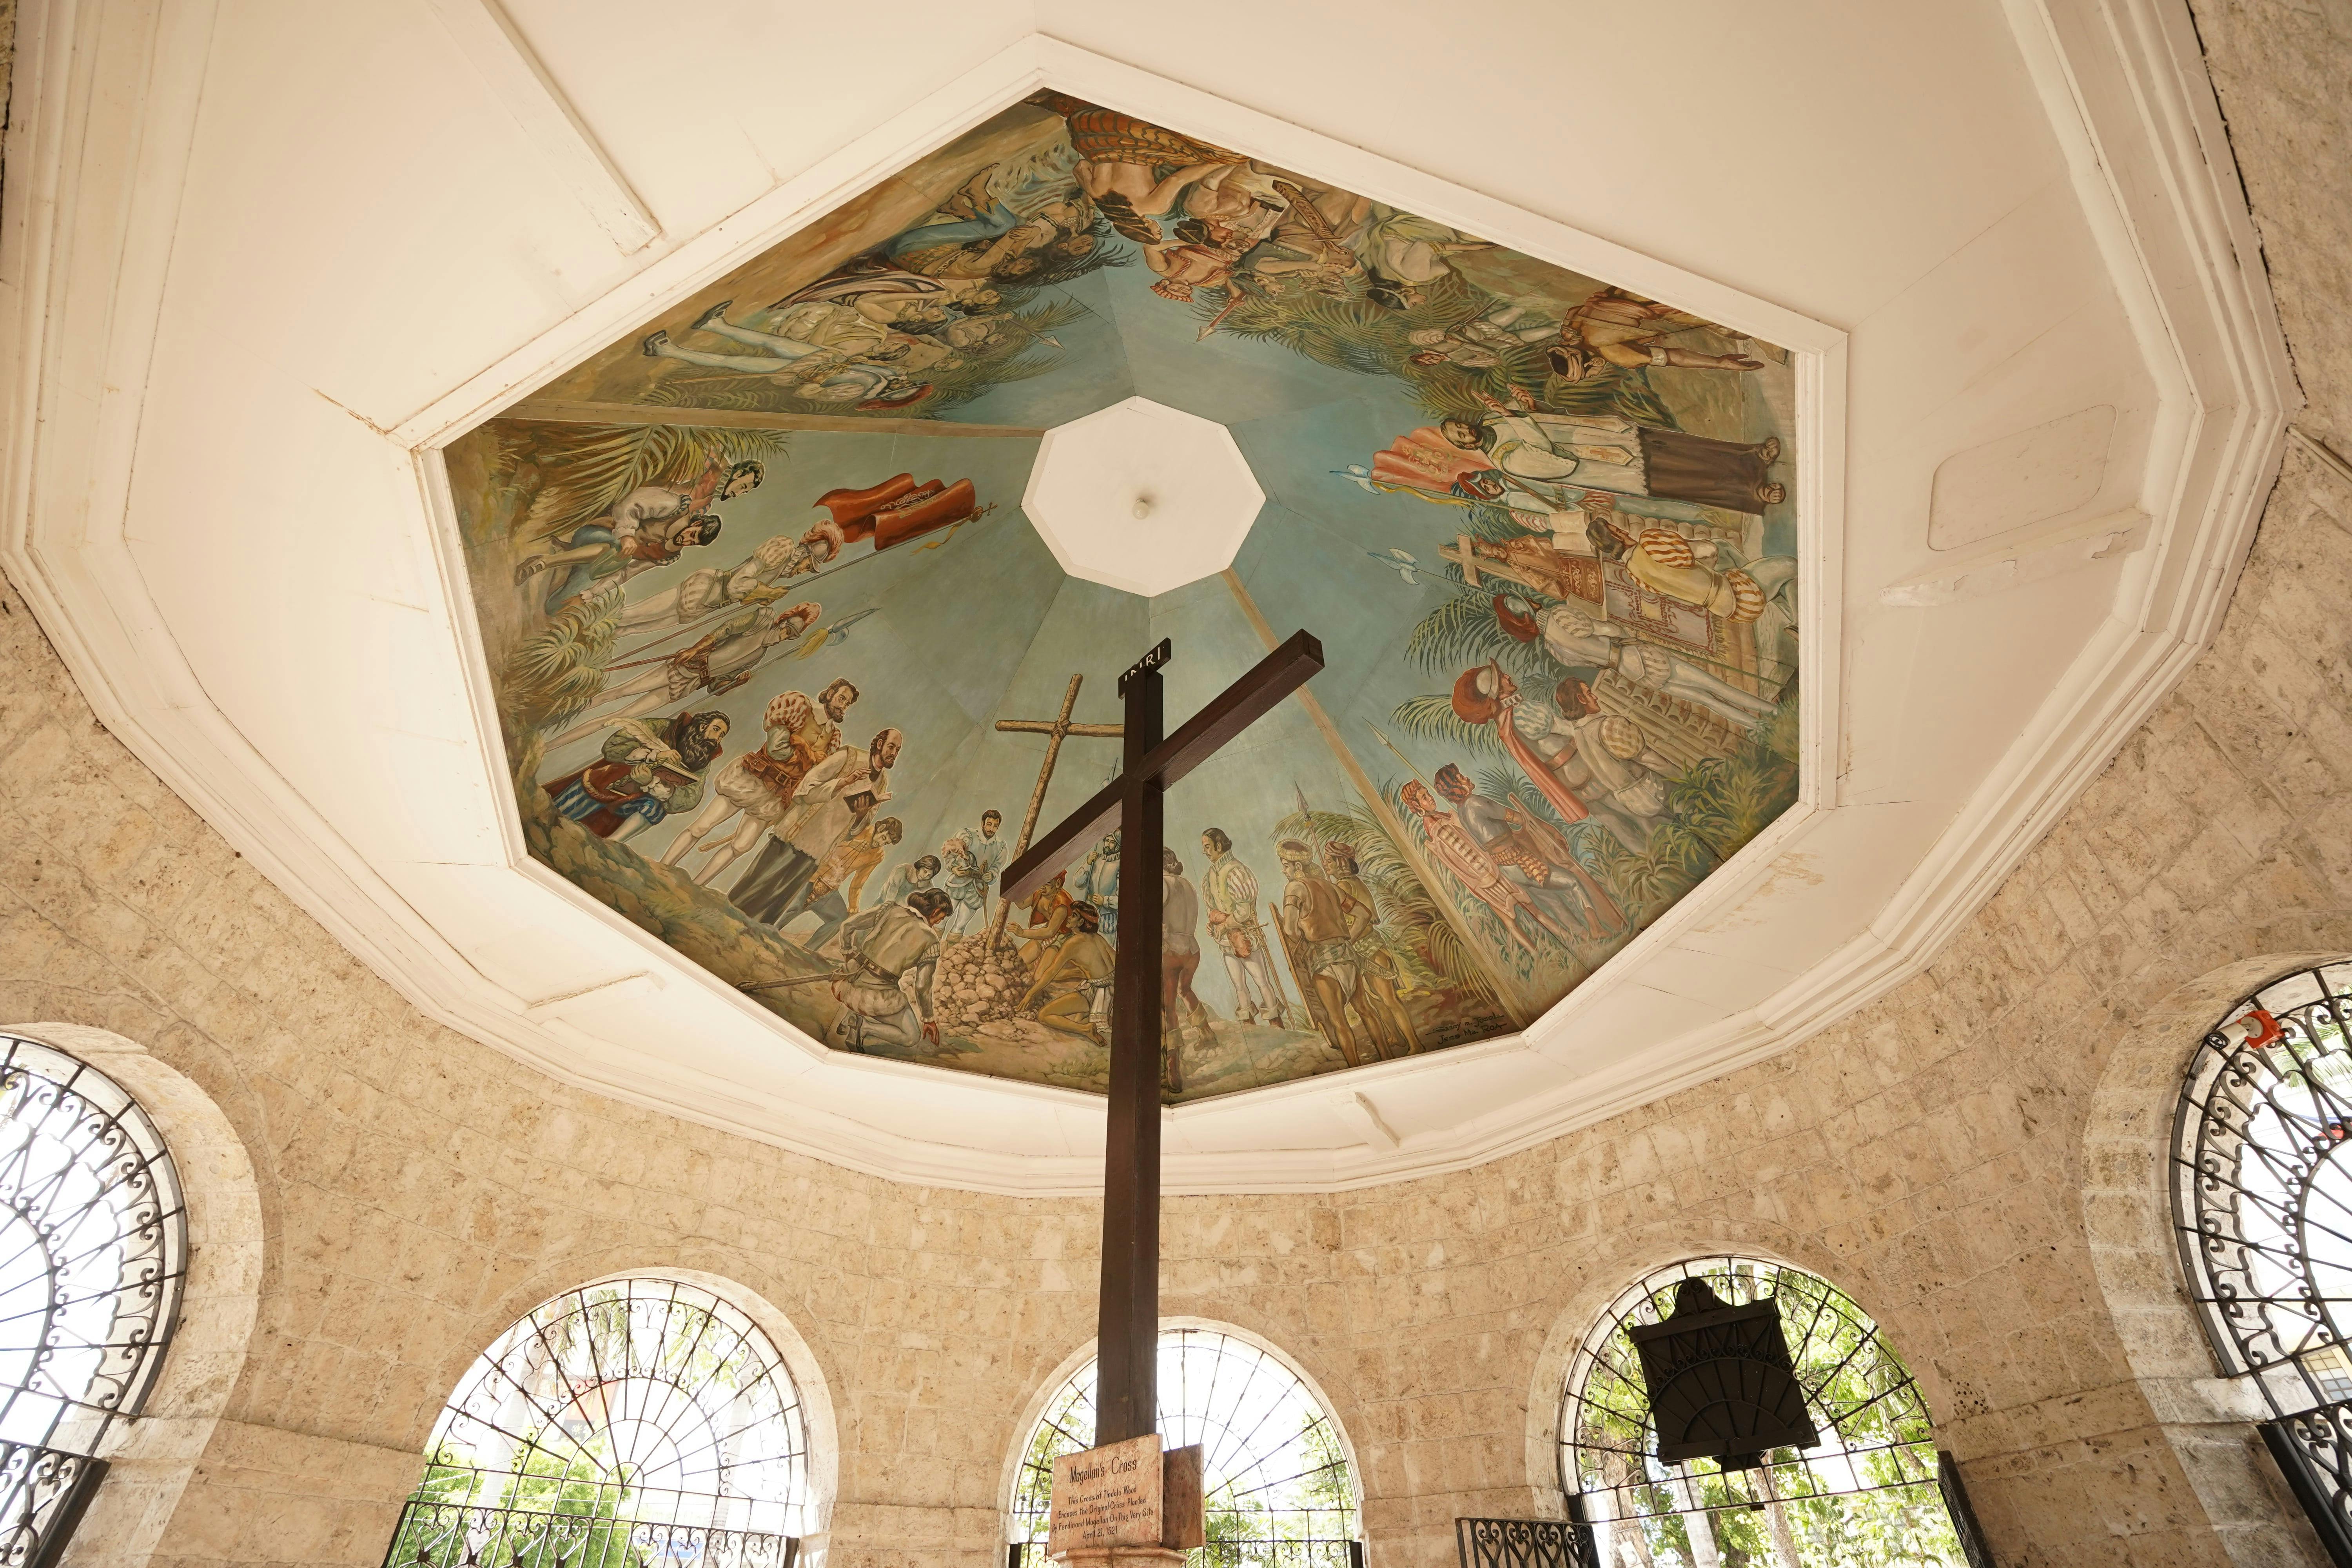 A glimpse of the ceiling at Magellan's Cross in Cebu